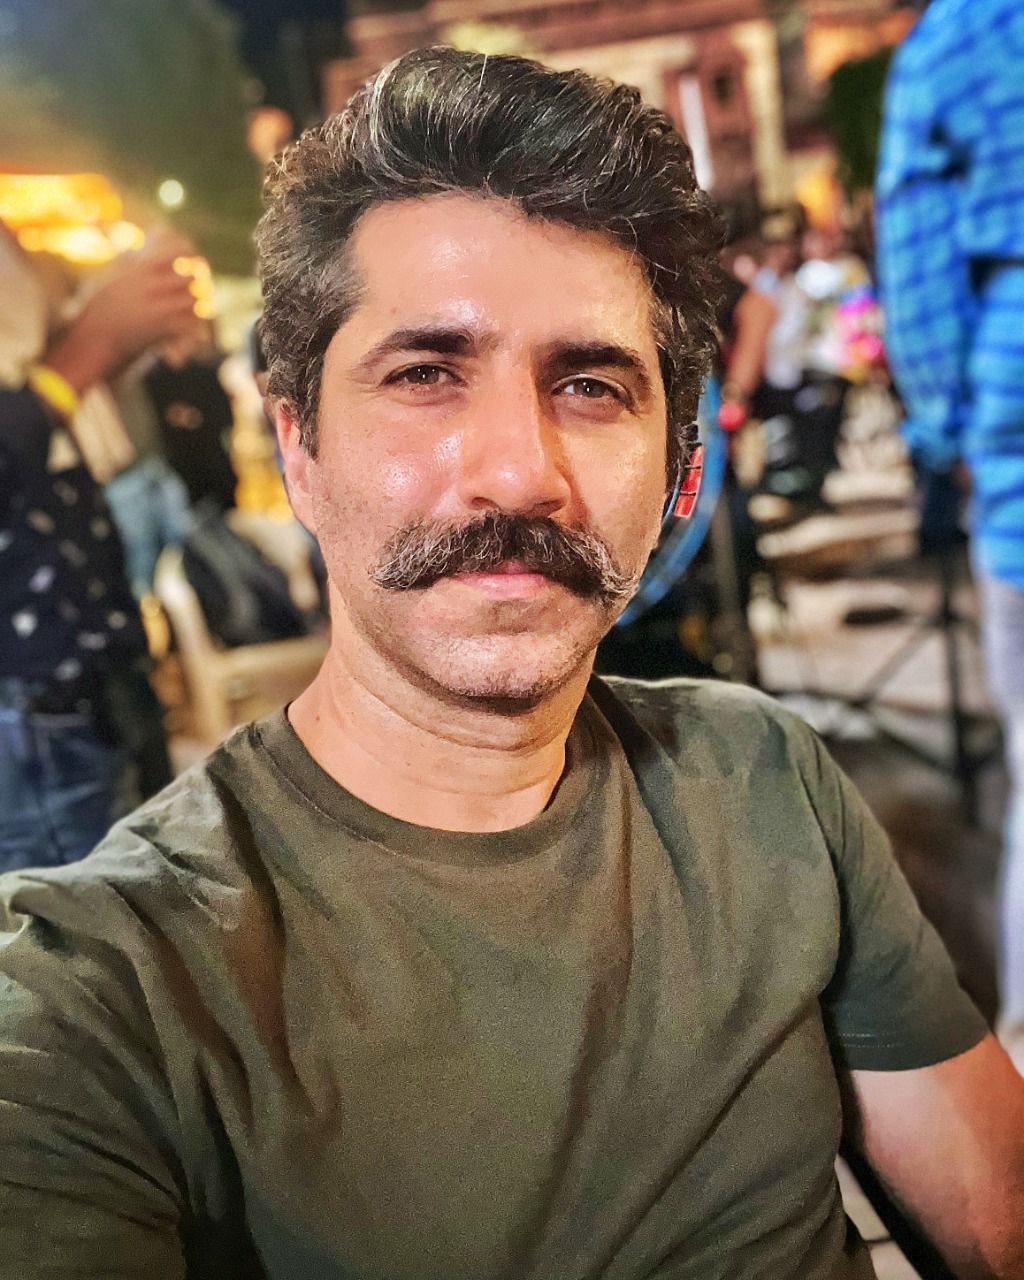 Actor Sumit Kaul will be next seen in Indian adaptation of Israeli series Fauda